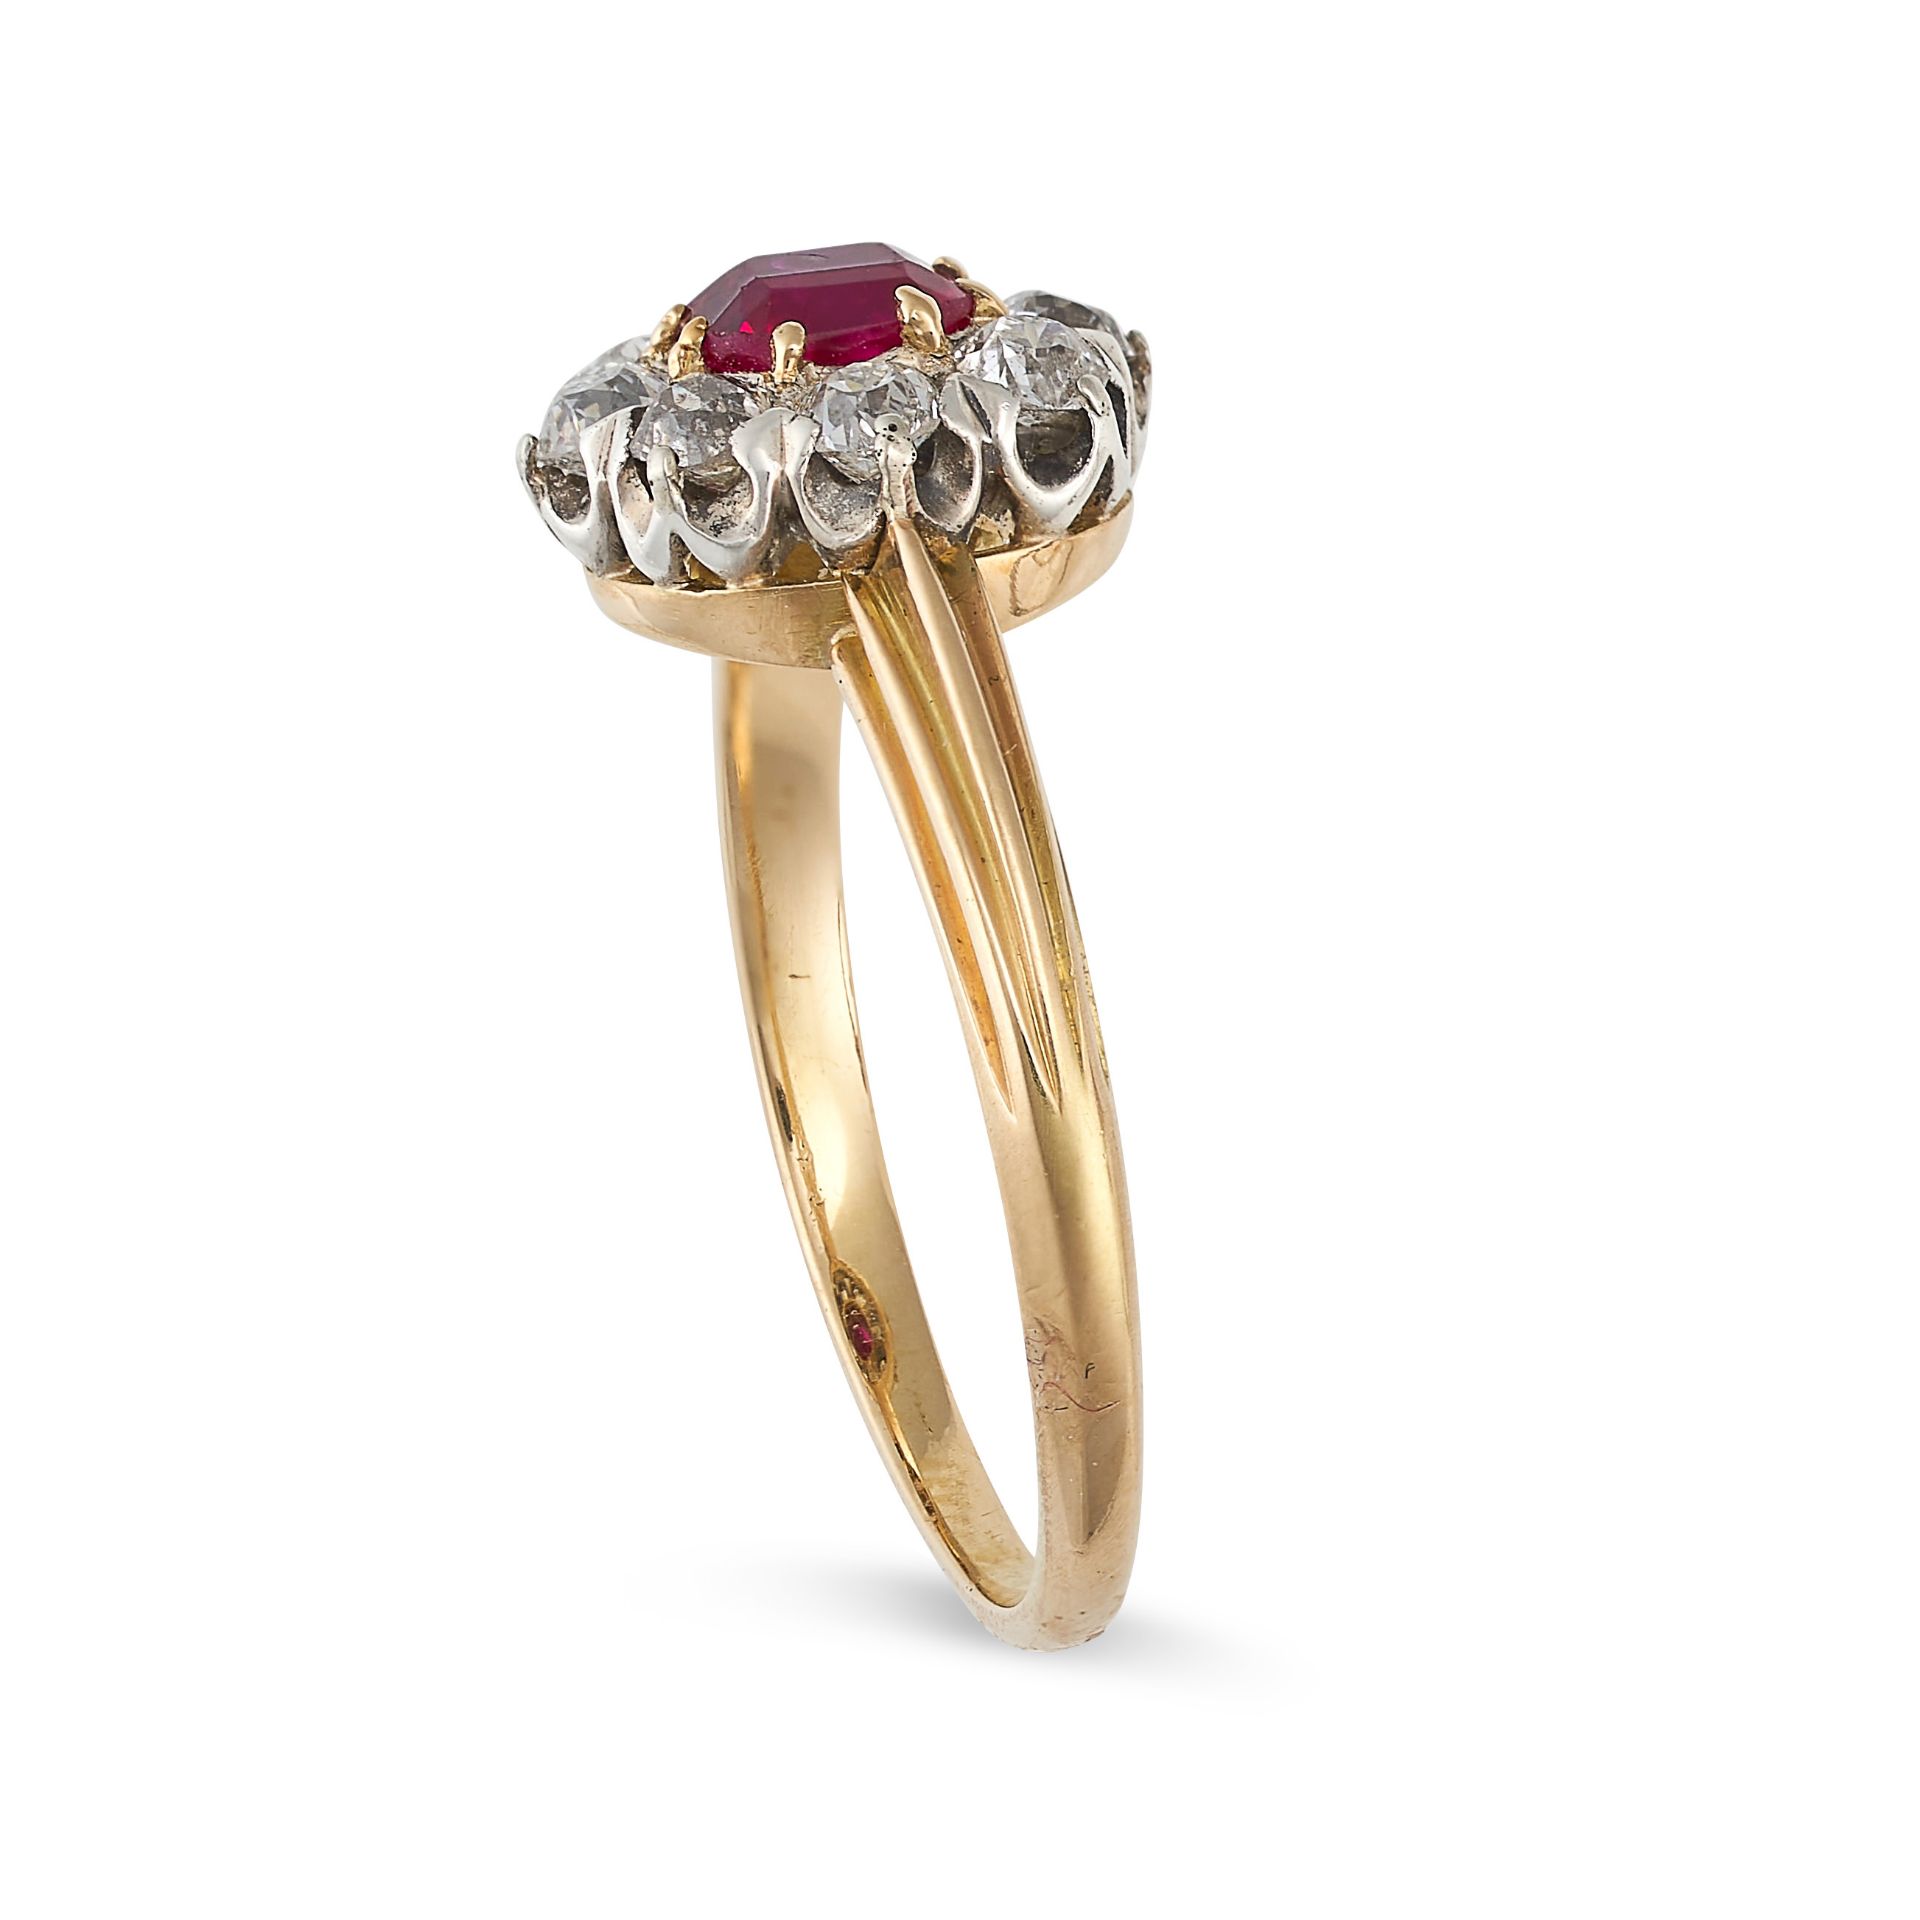 A RUBY AND DIAMOND CLUSTER RING in yellow gold and platinum, set with a step cut ruby of 0.66 carats - Image 2 of 2